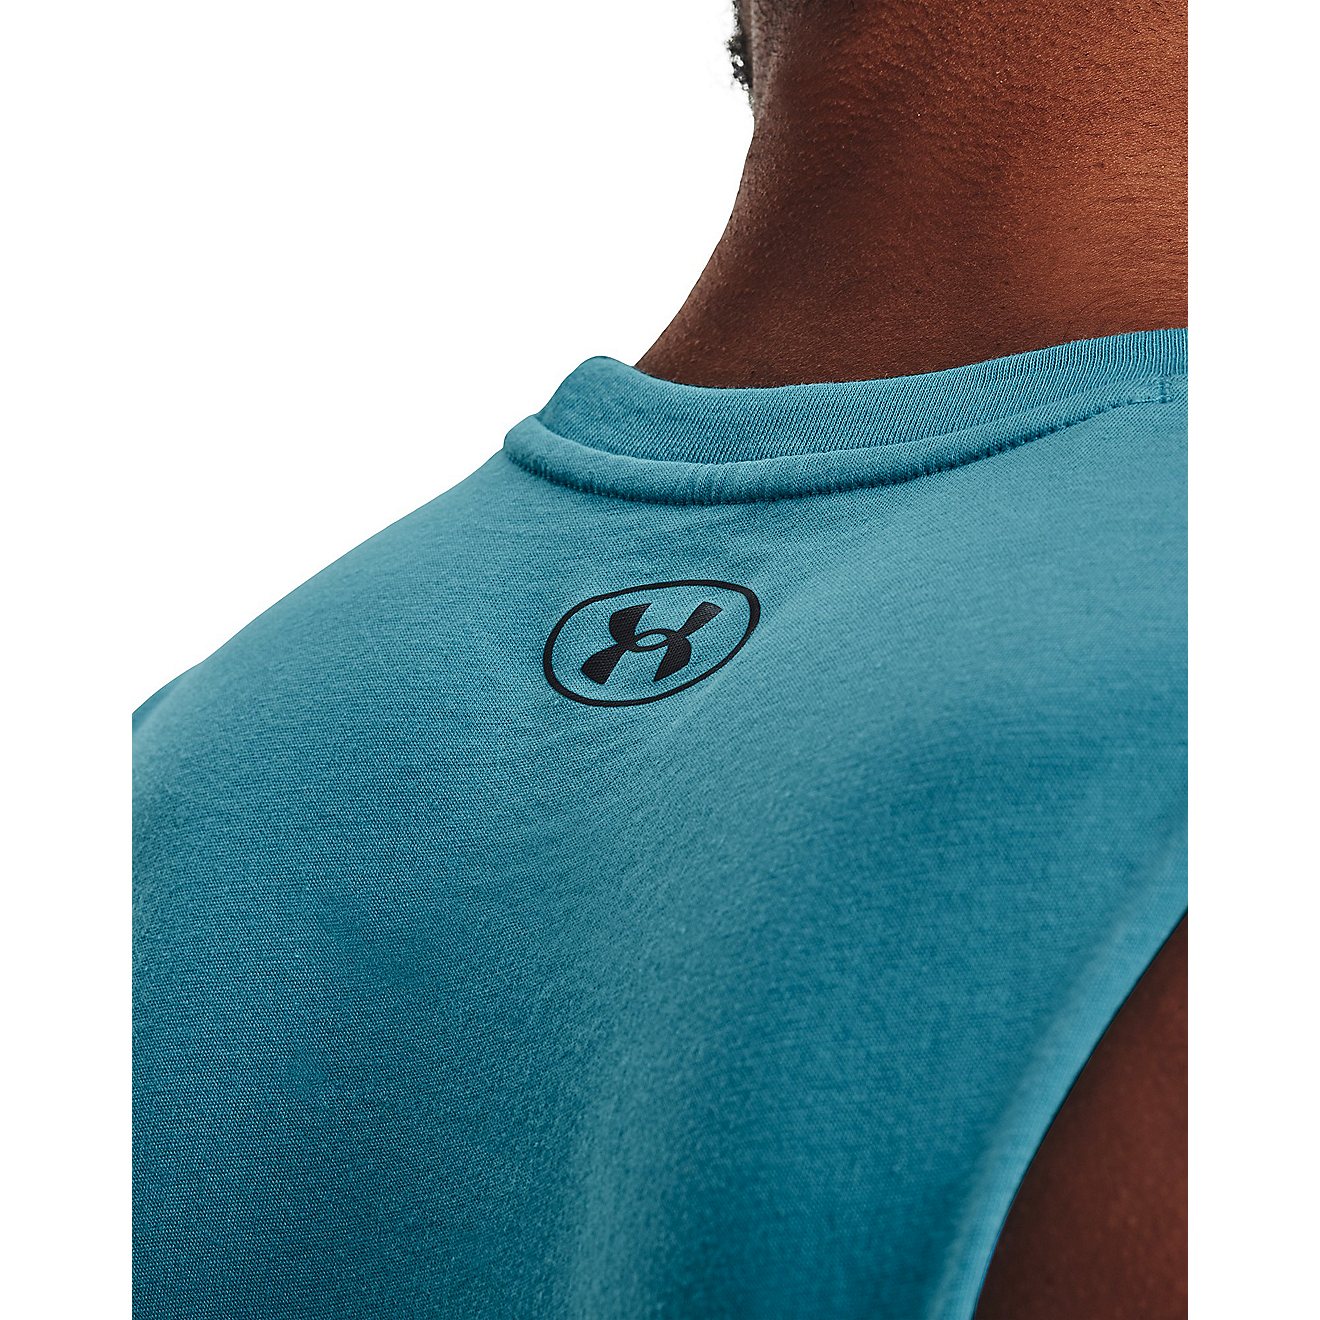 Under Armour Men's Sportstyle Left Chest Cut-off Sleeveless Top                                                                  - view number 4